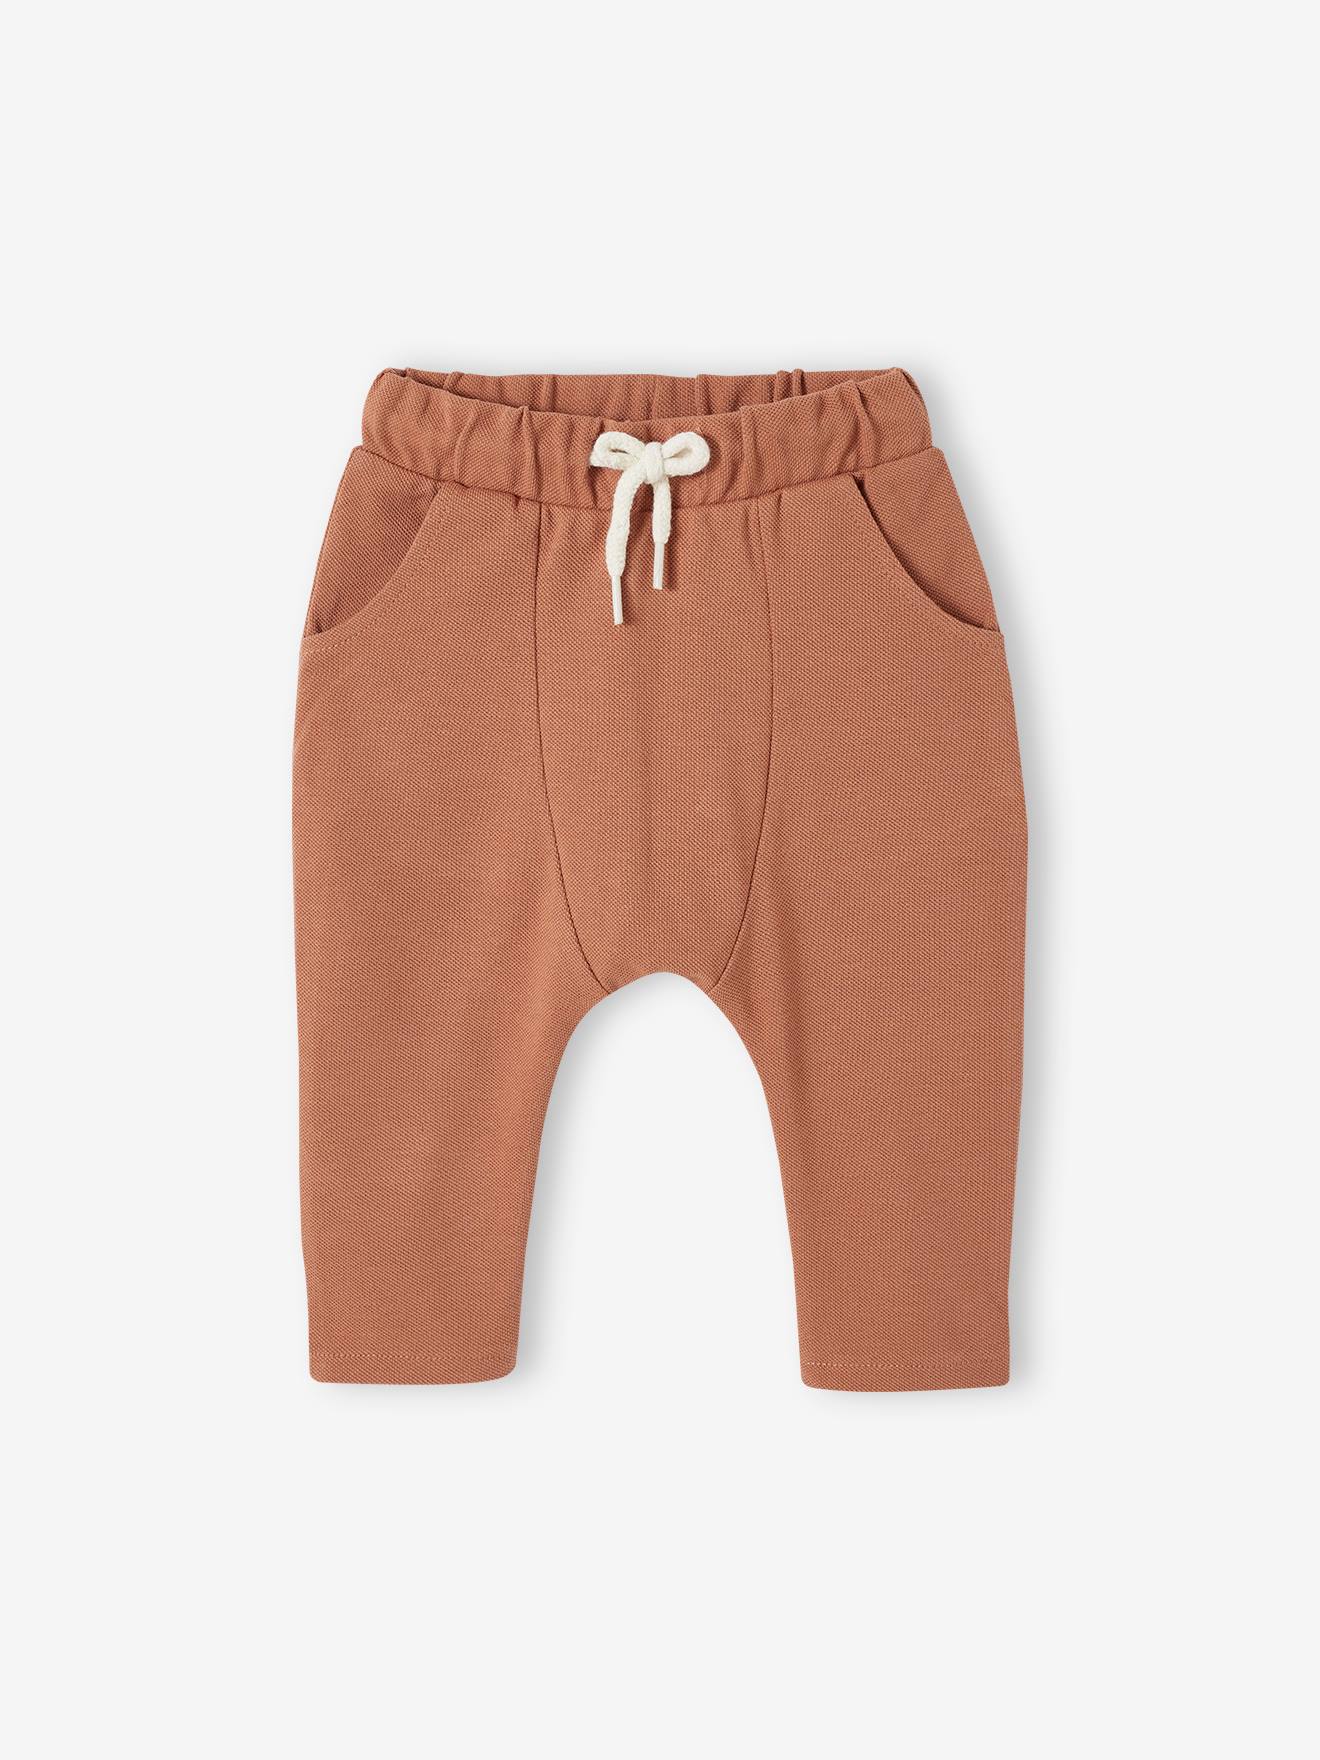 Pique Knit Trousers for Babies brown